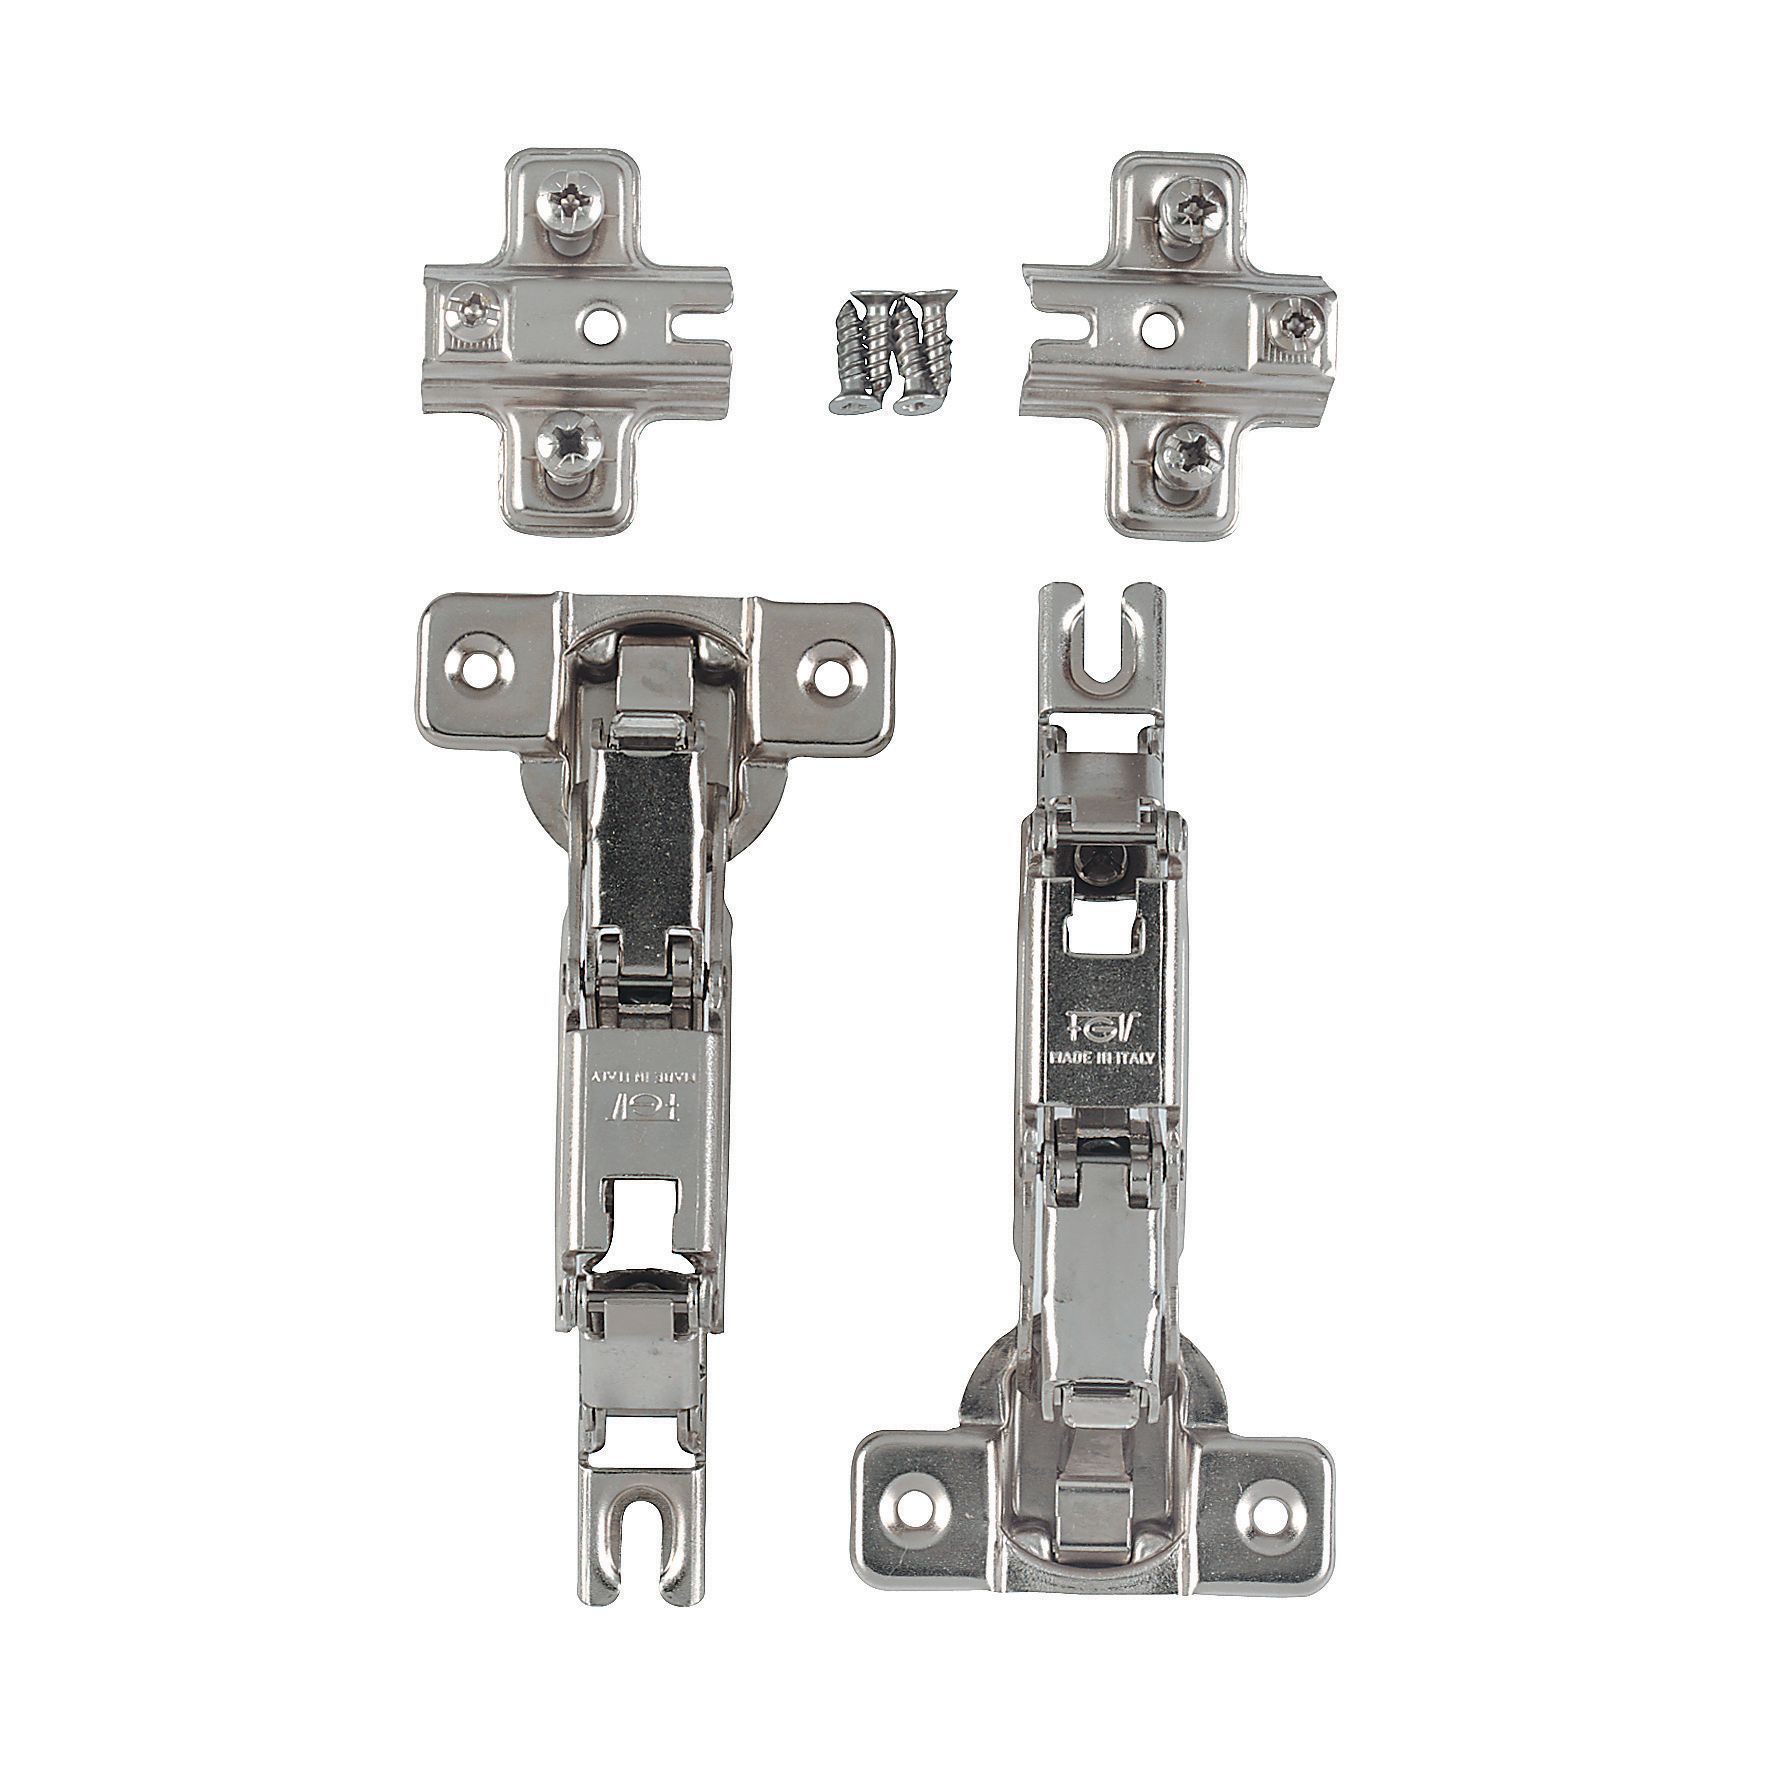 It Kitchens 170 Standard Cabinet Hinge Pack Of 2 Departments